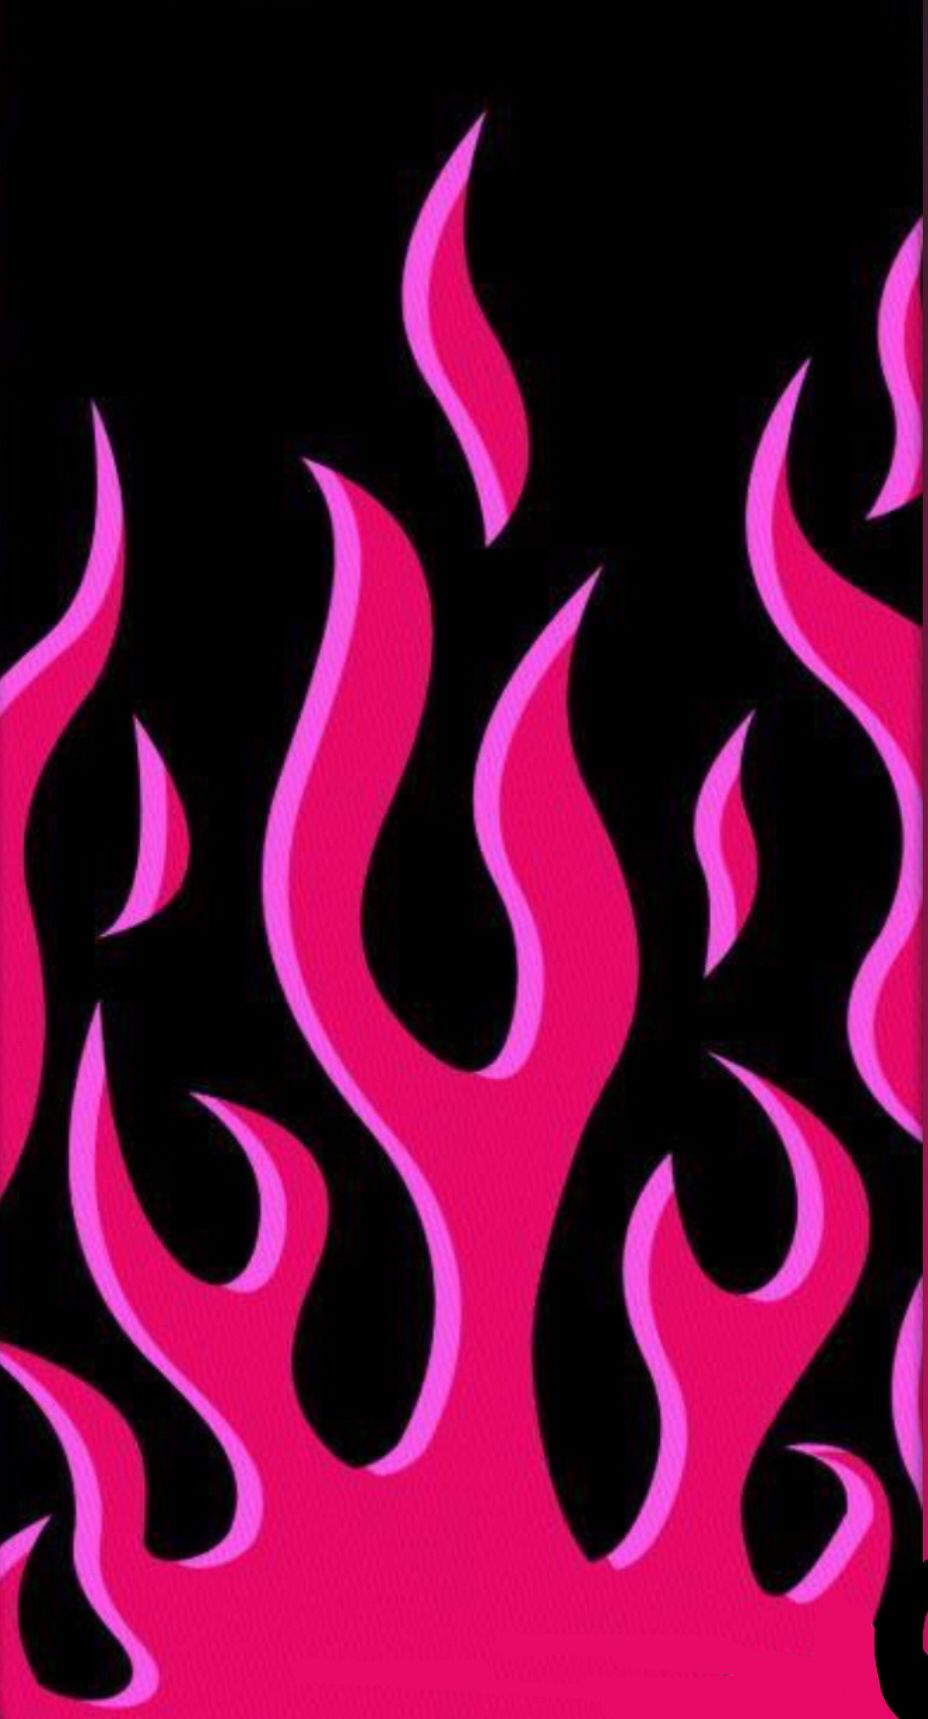 A pink and black fire design on the wall - Fire, flames